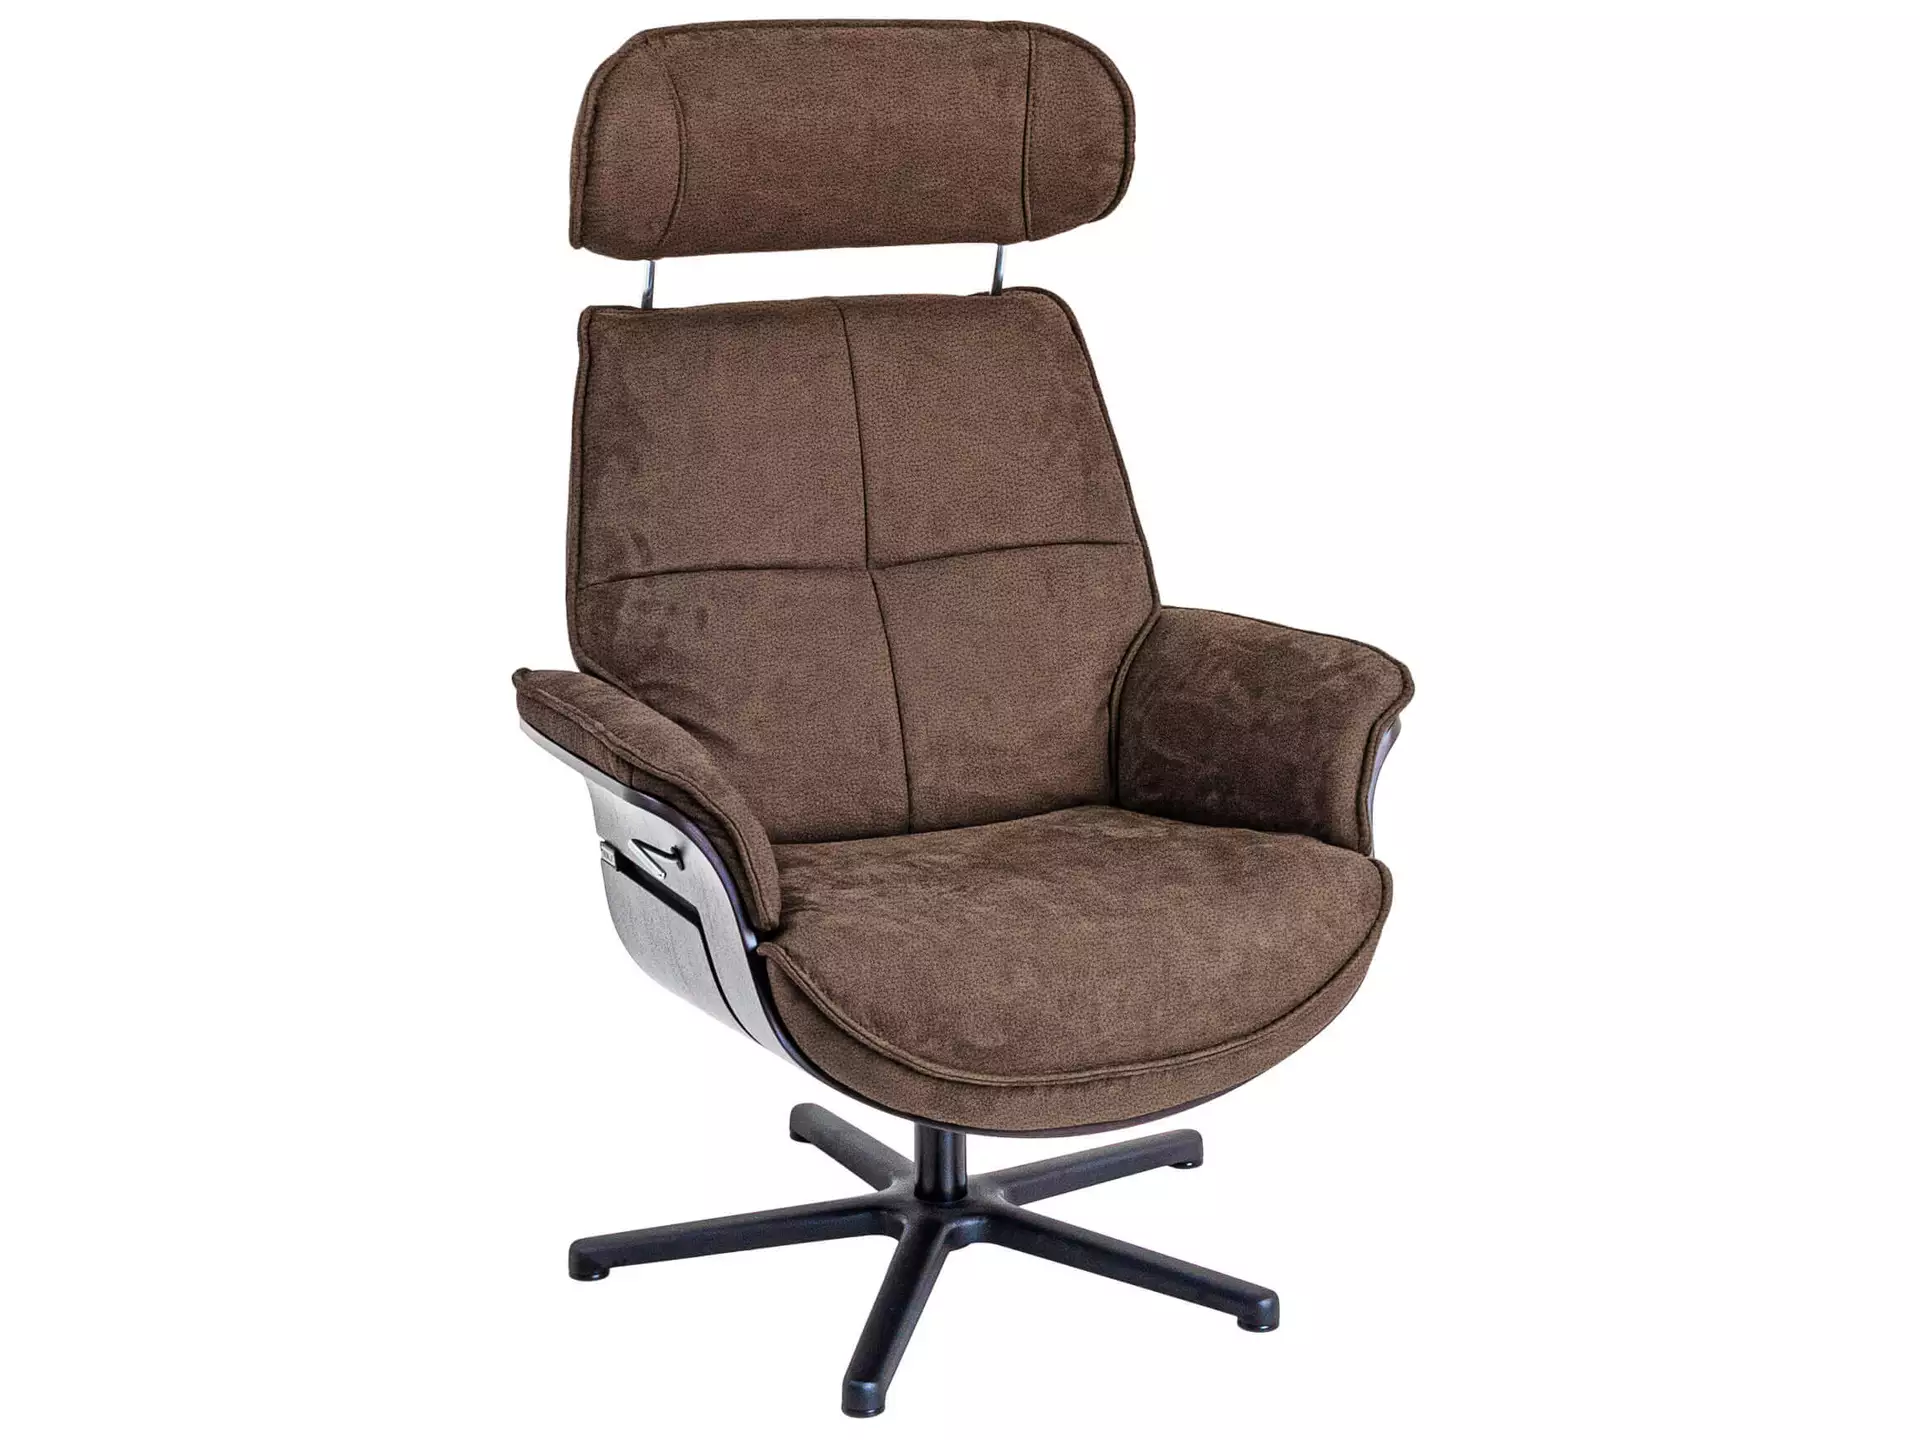 Relaxer Curacao Eiche Dunkel Basic Polipol / Farbe: Stone / Material: Stoff Basic